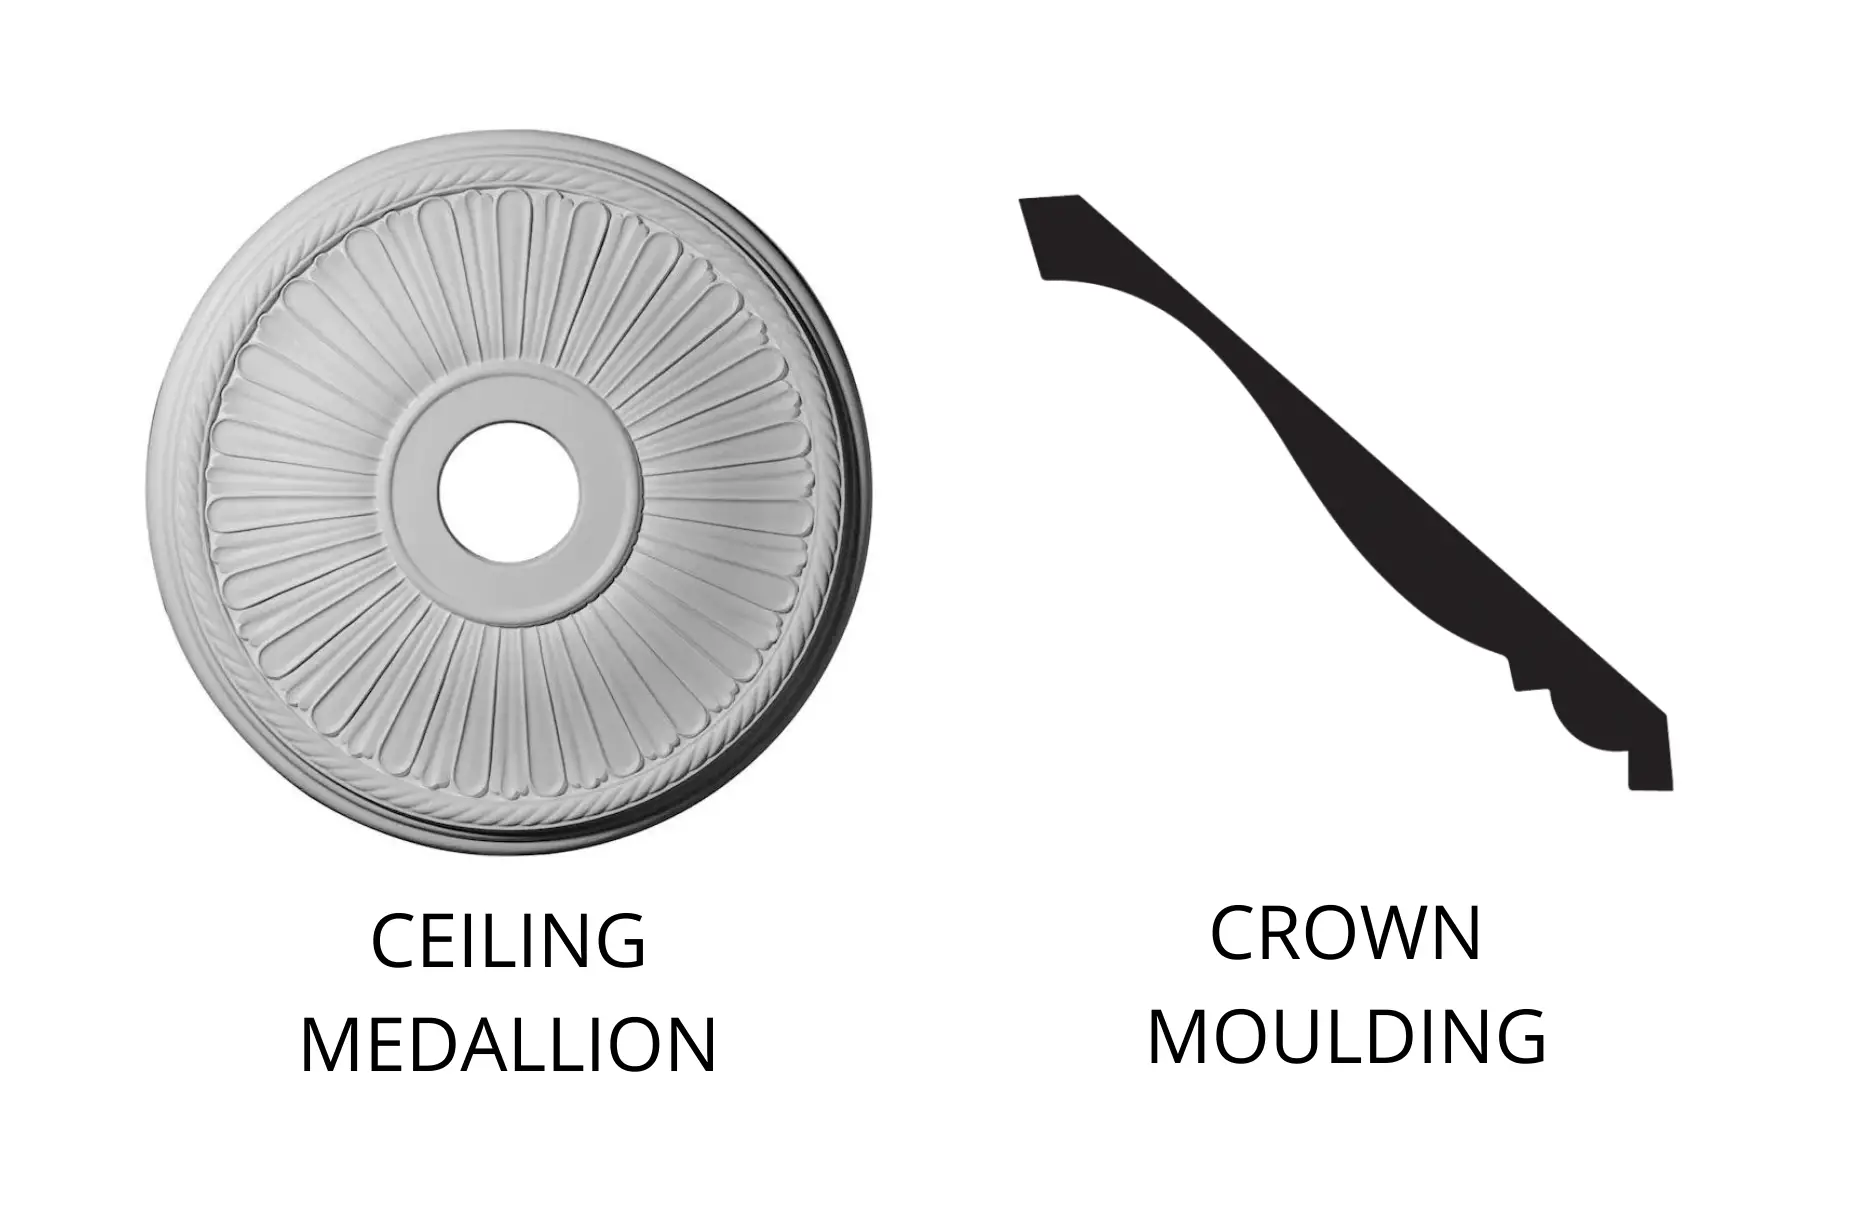 ceiling medallion and crown moulding